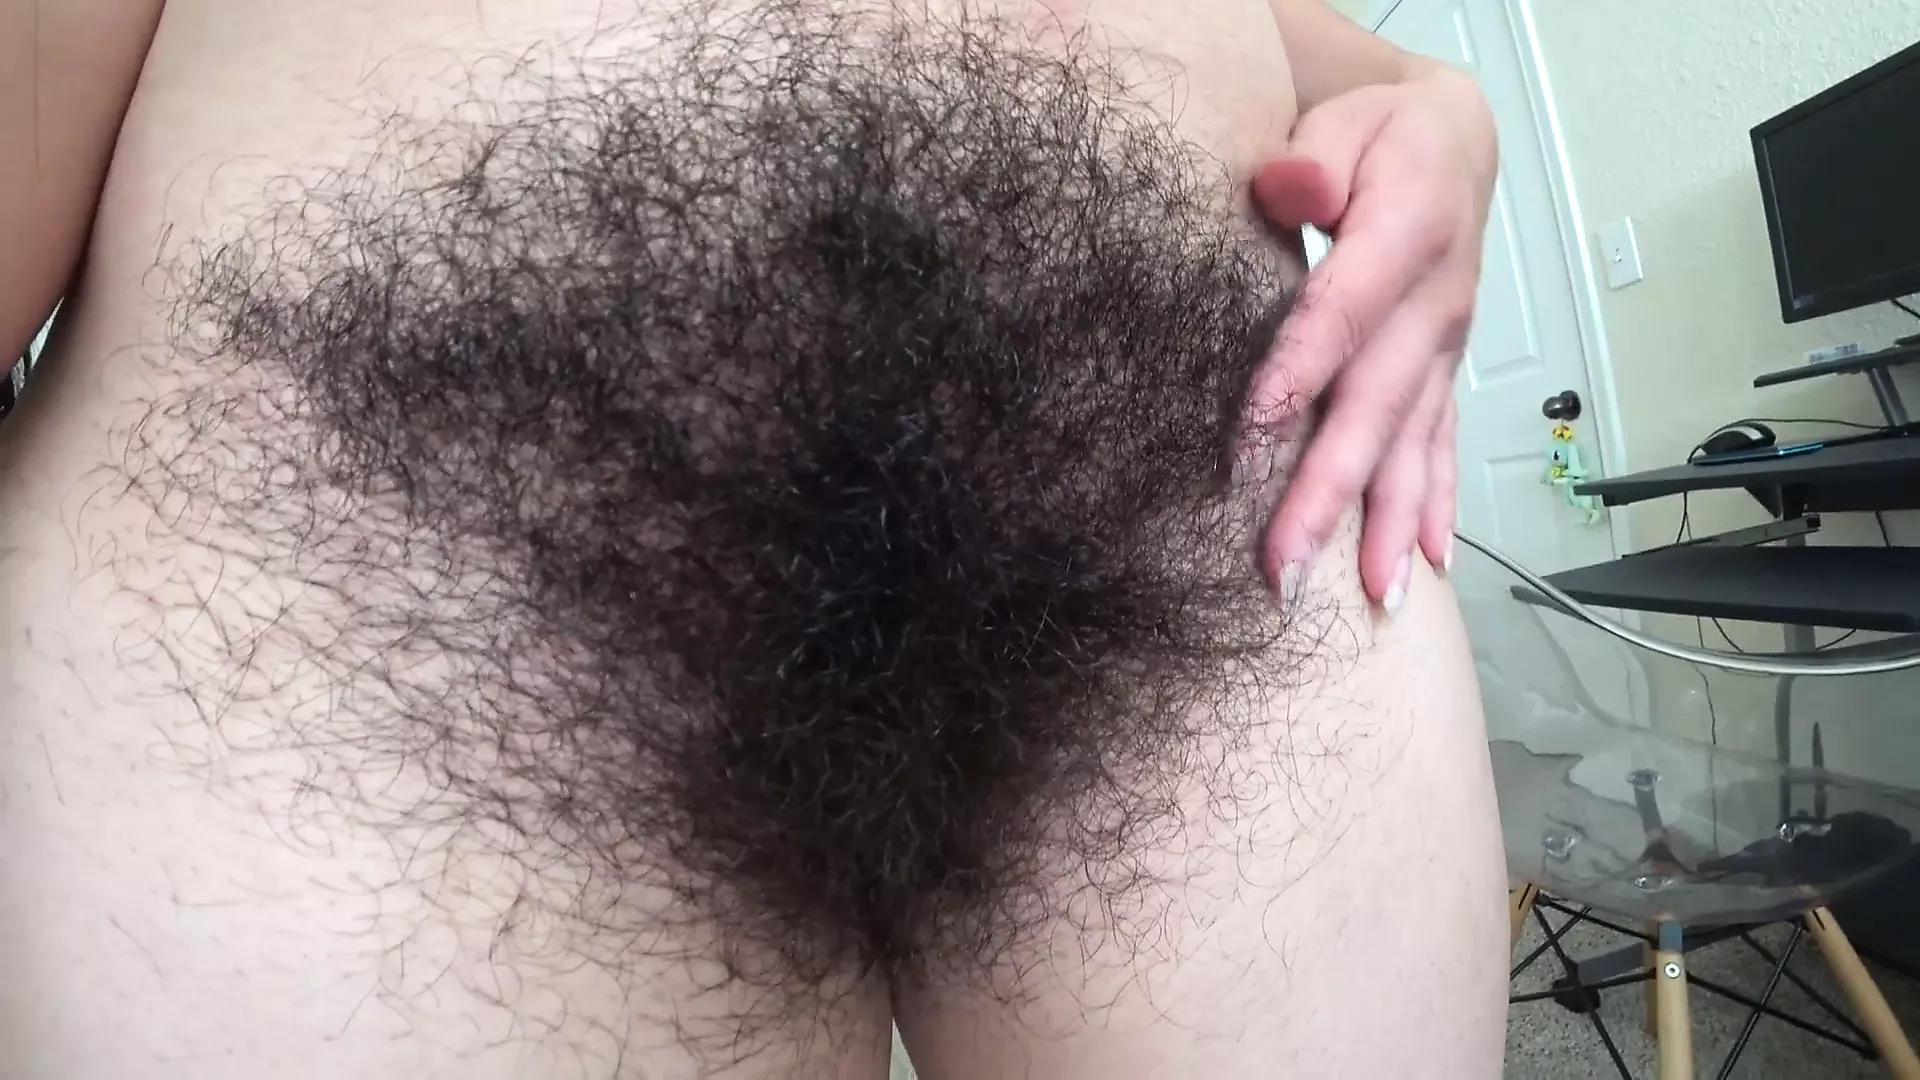 Extremely Hairy Tits - Extremely Hairy Girl: Free Hairy Rough HD Porn Video 5b | xHamster